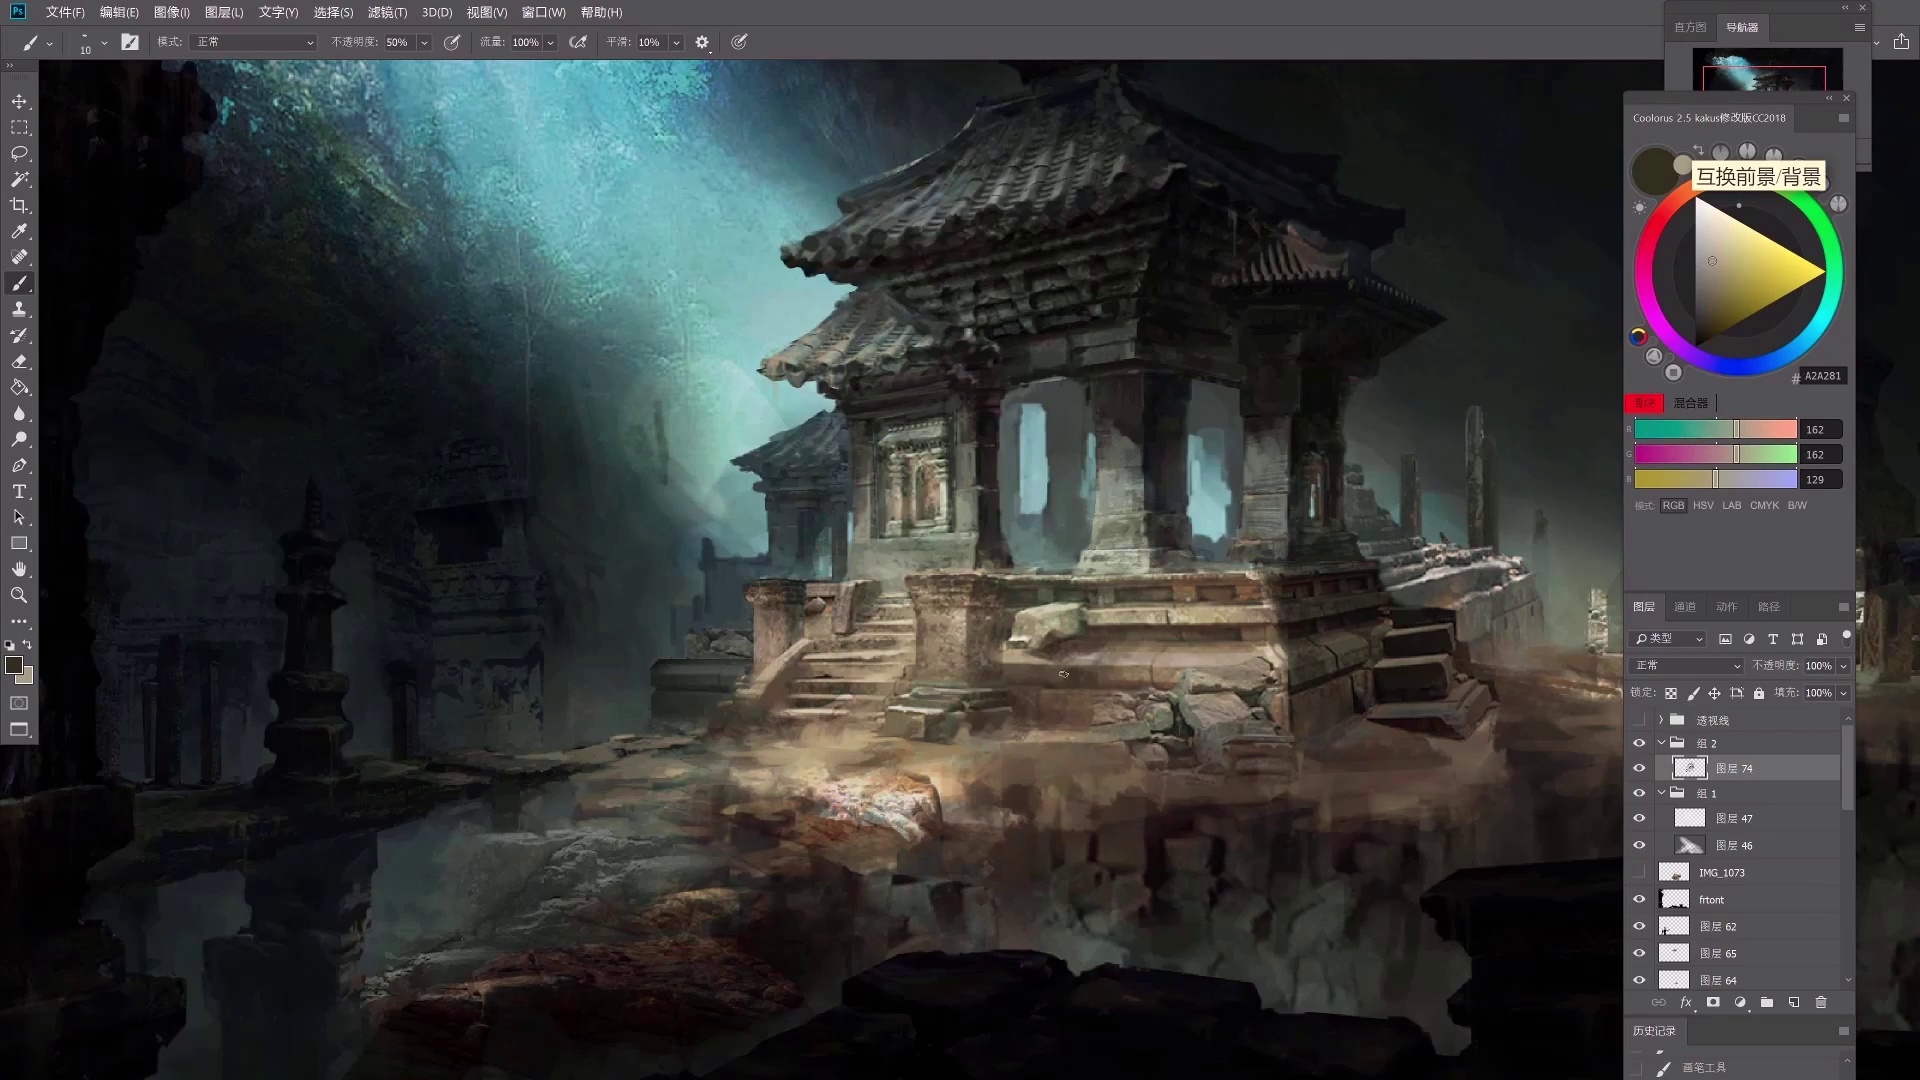 Basic Environment Concept Design for Wuxia Films (2022) with Wingfox Studio